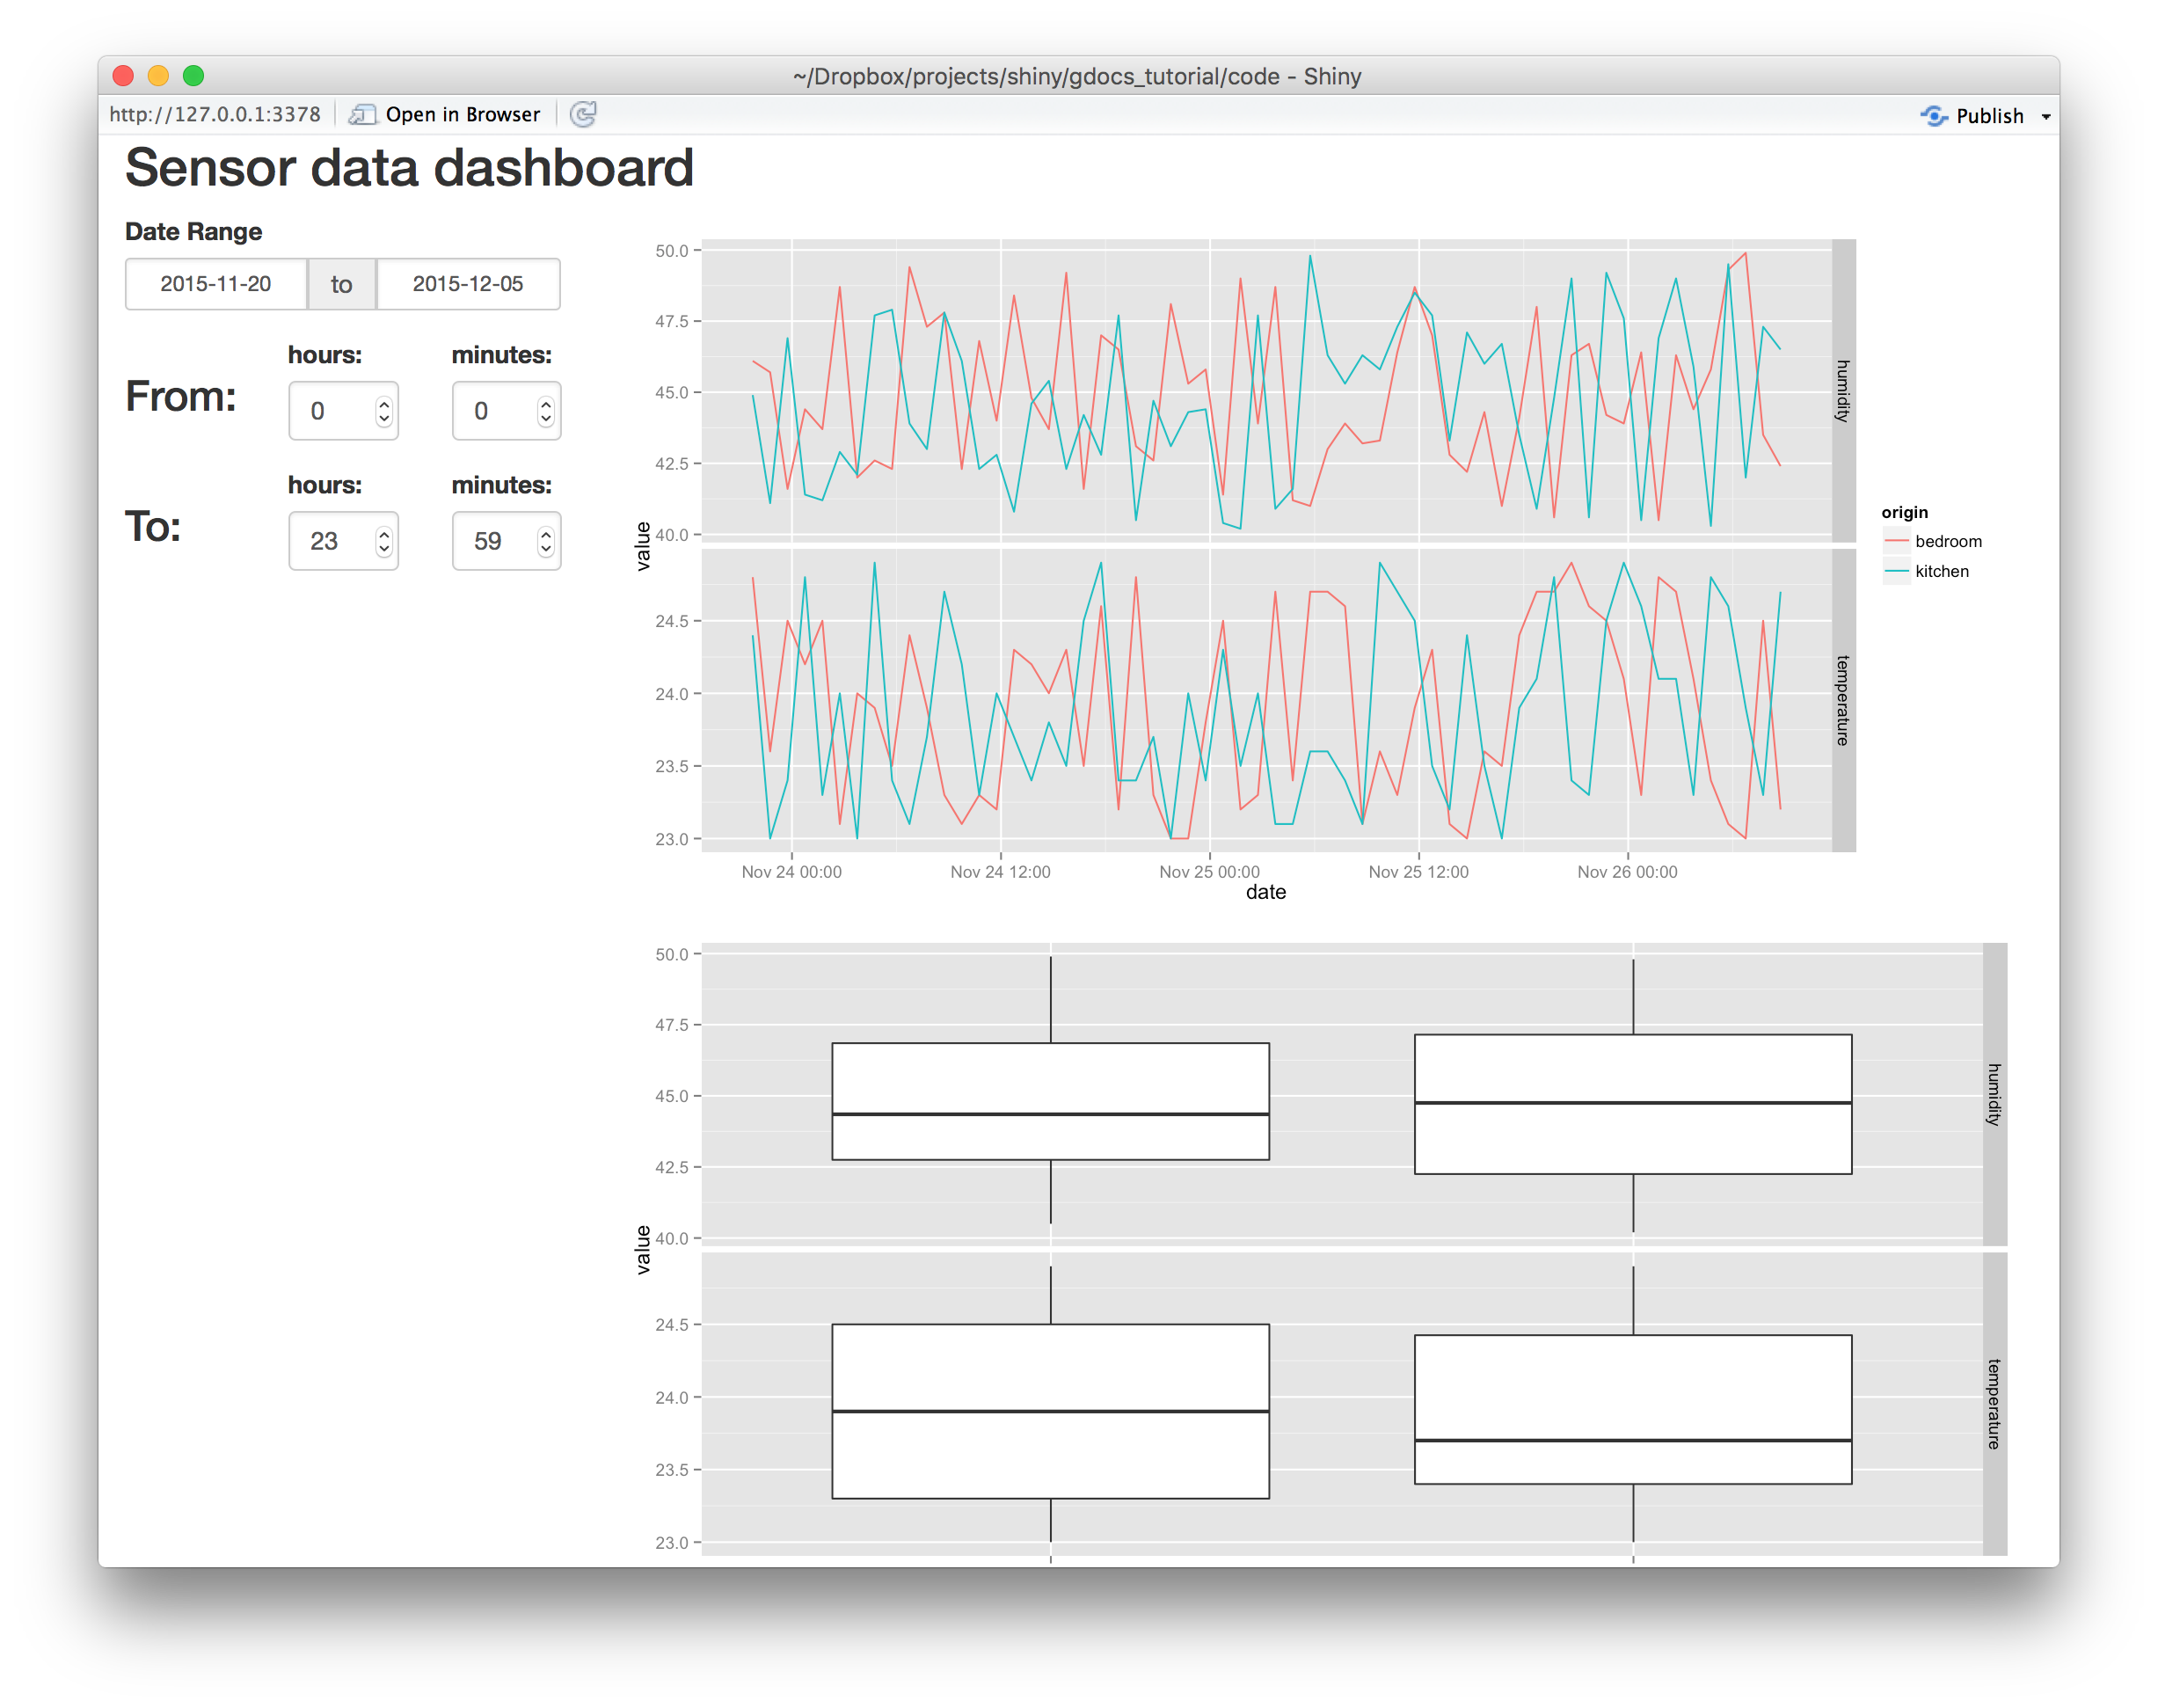 The final product of our tutorial: a live interactive web-based dashboard